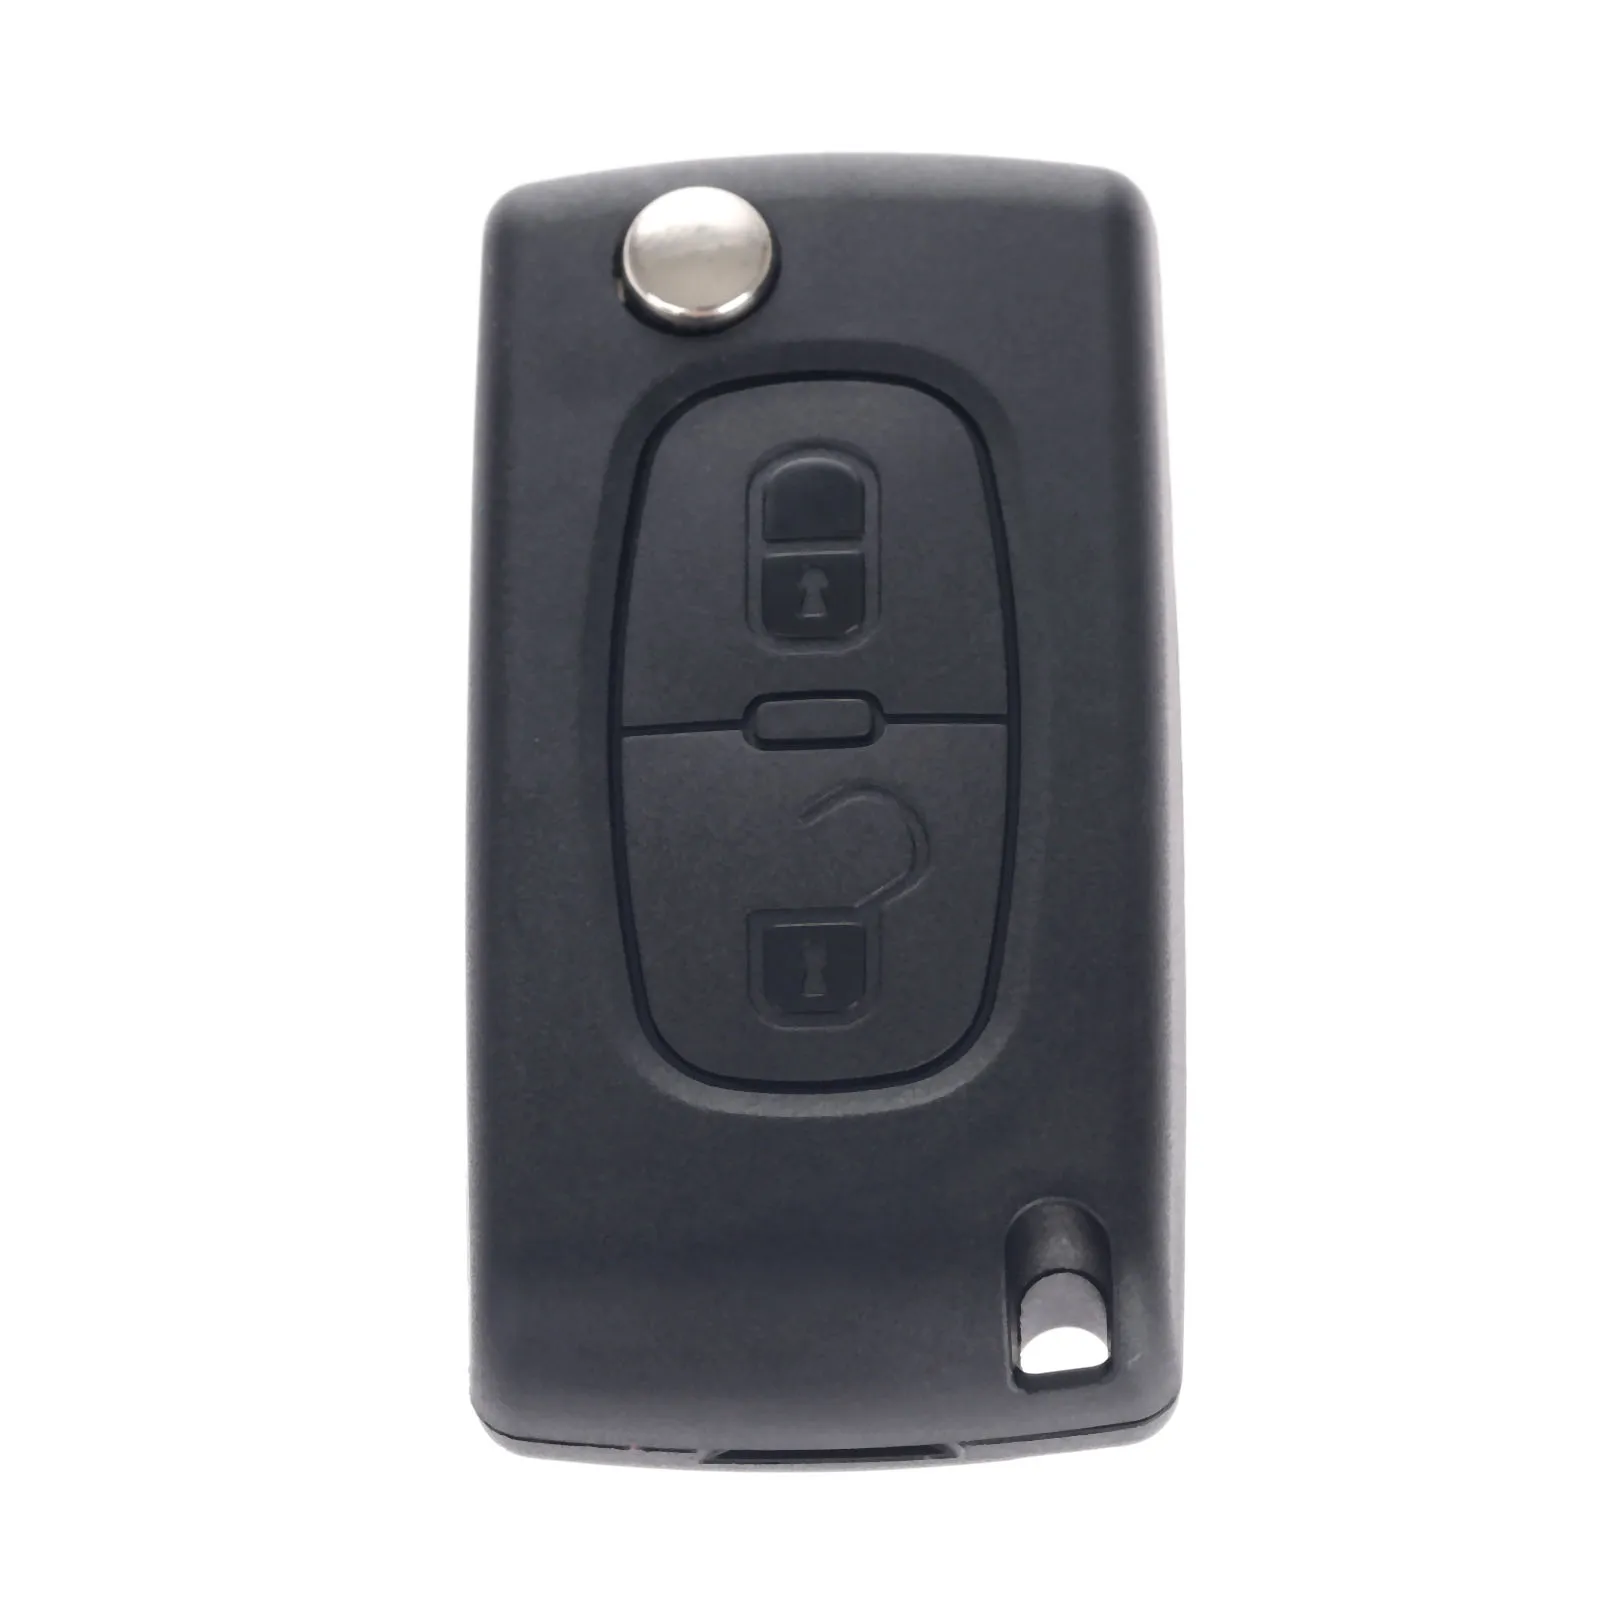 

2 Buttons Auto Flip Folding Remote Entry Car Key Shell Case Cover Fob Blank Blade Replacement Fit for Citroen C2 C5 C3 C4 C6 C8